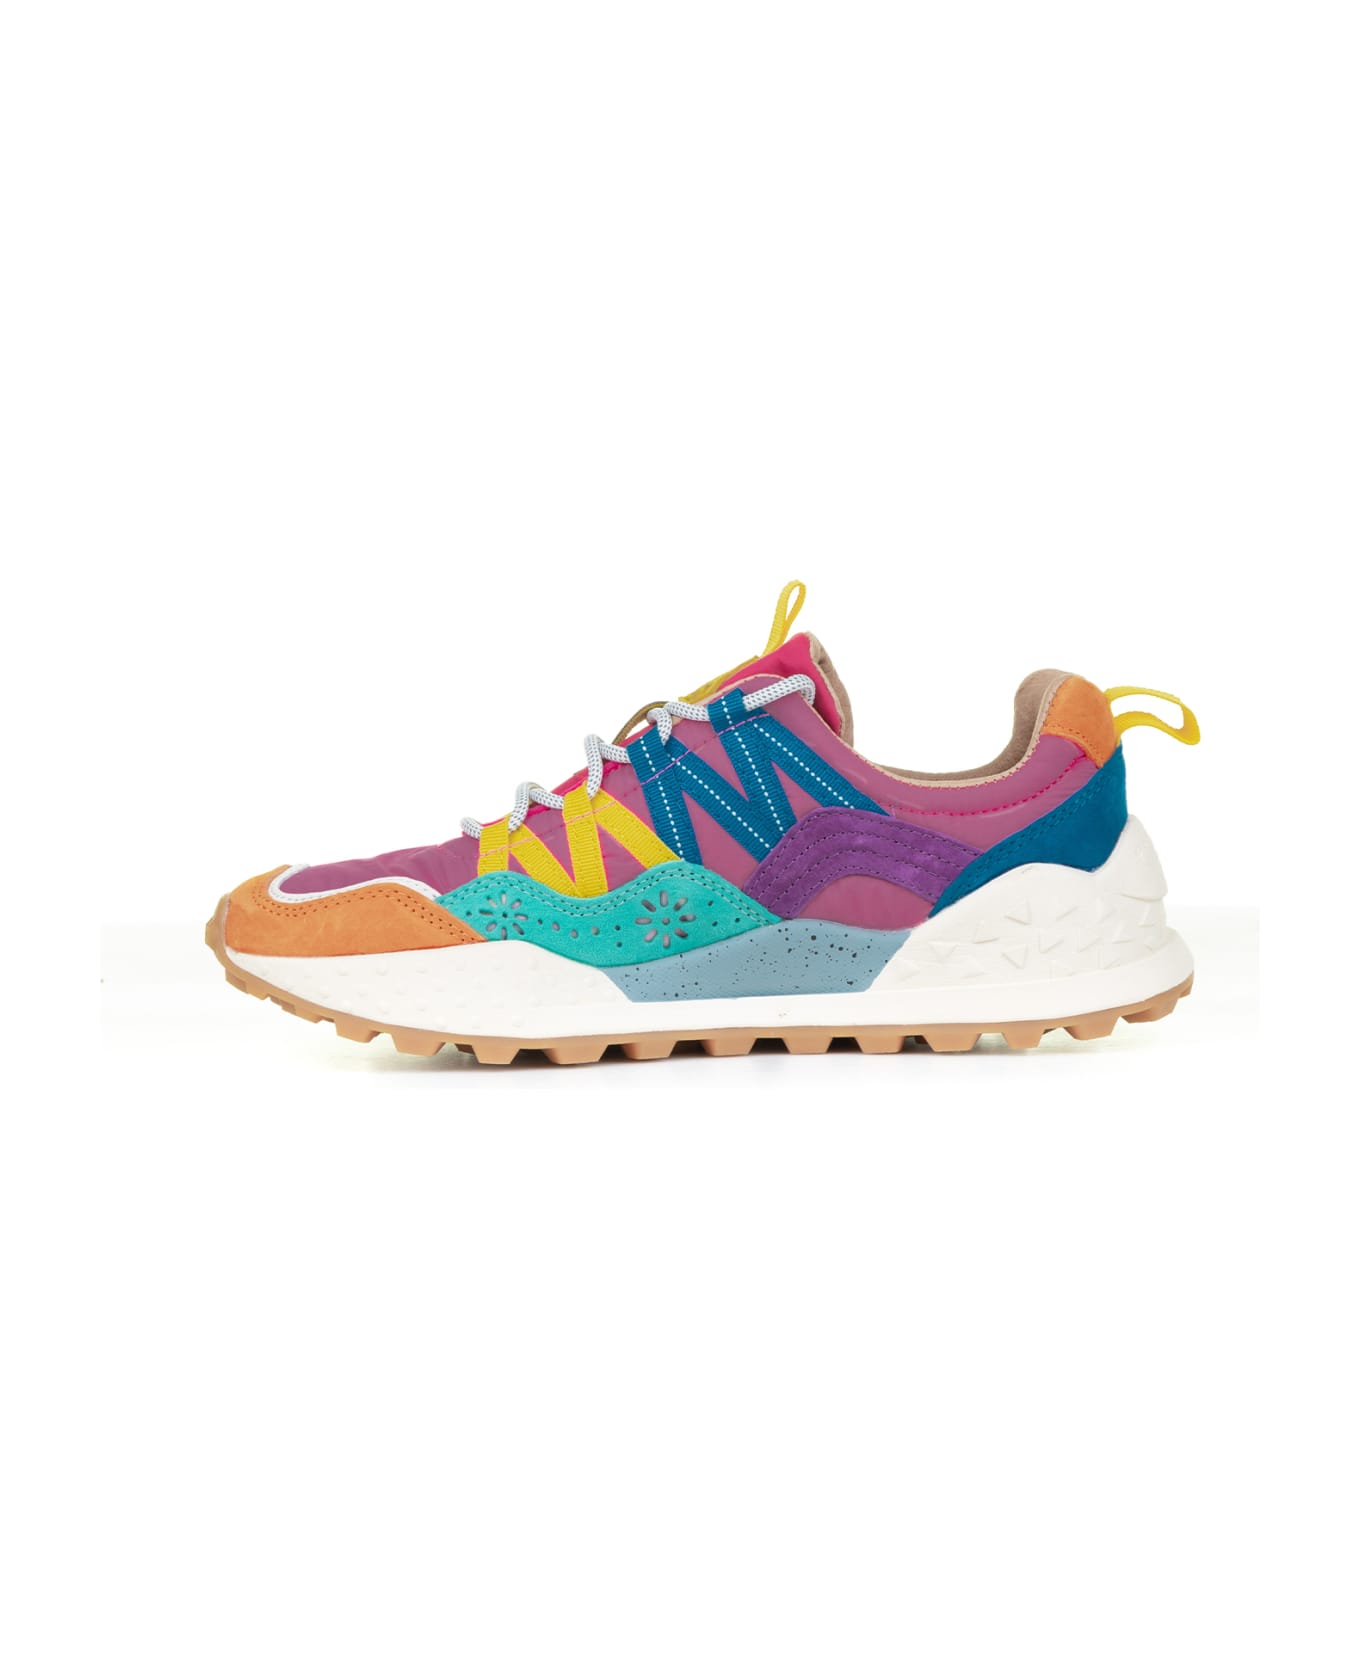 Flower Mountain Multicolored Washi Sneakers In Suede And Nylon - ORANGE GREEN PINK